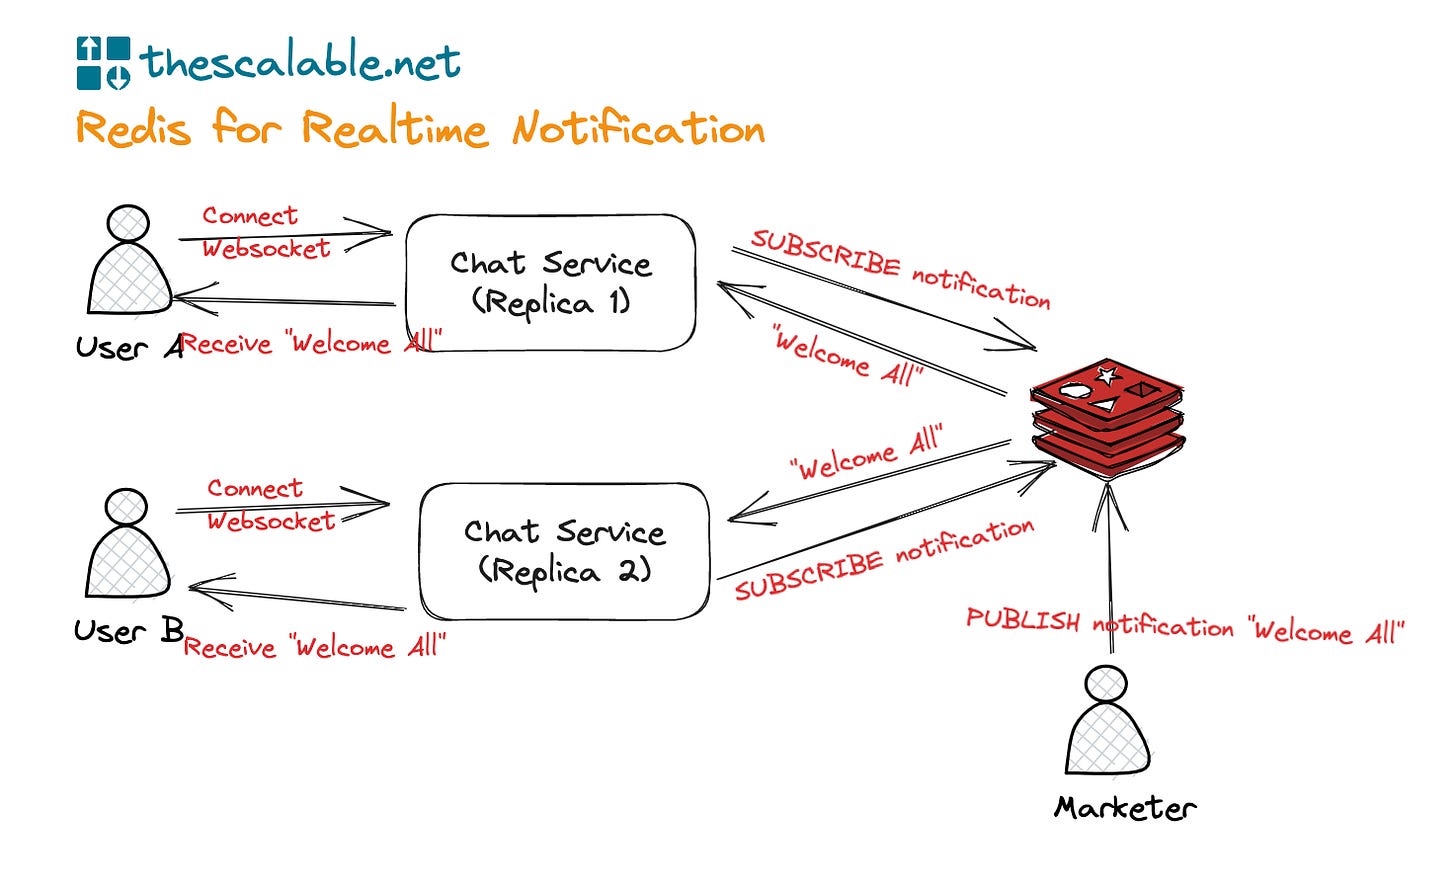 redis for real-time notification system design